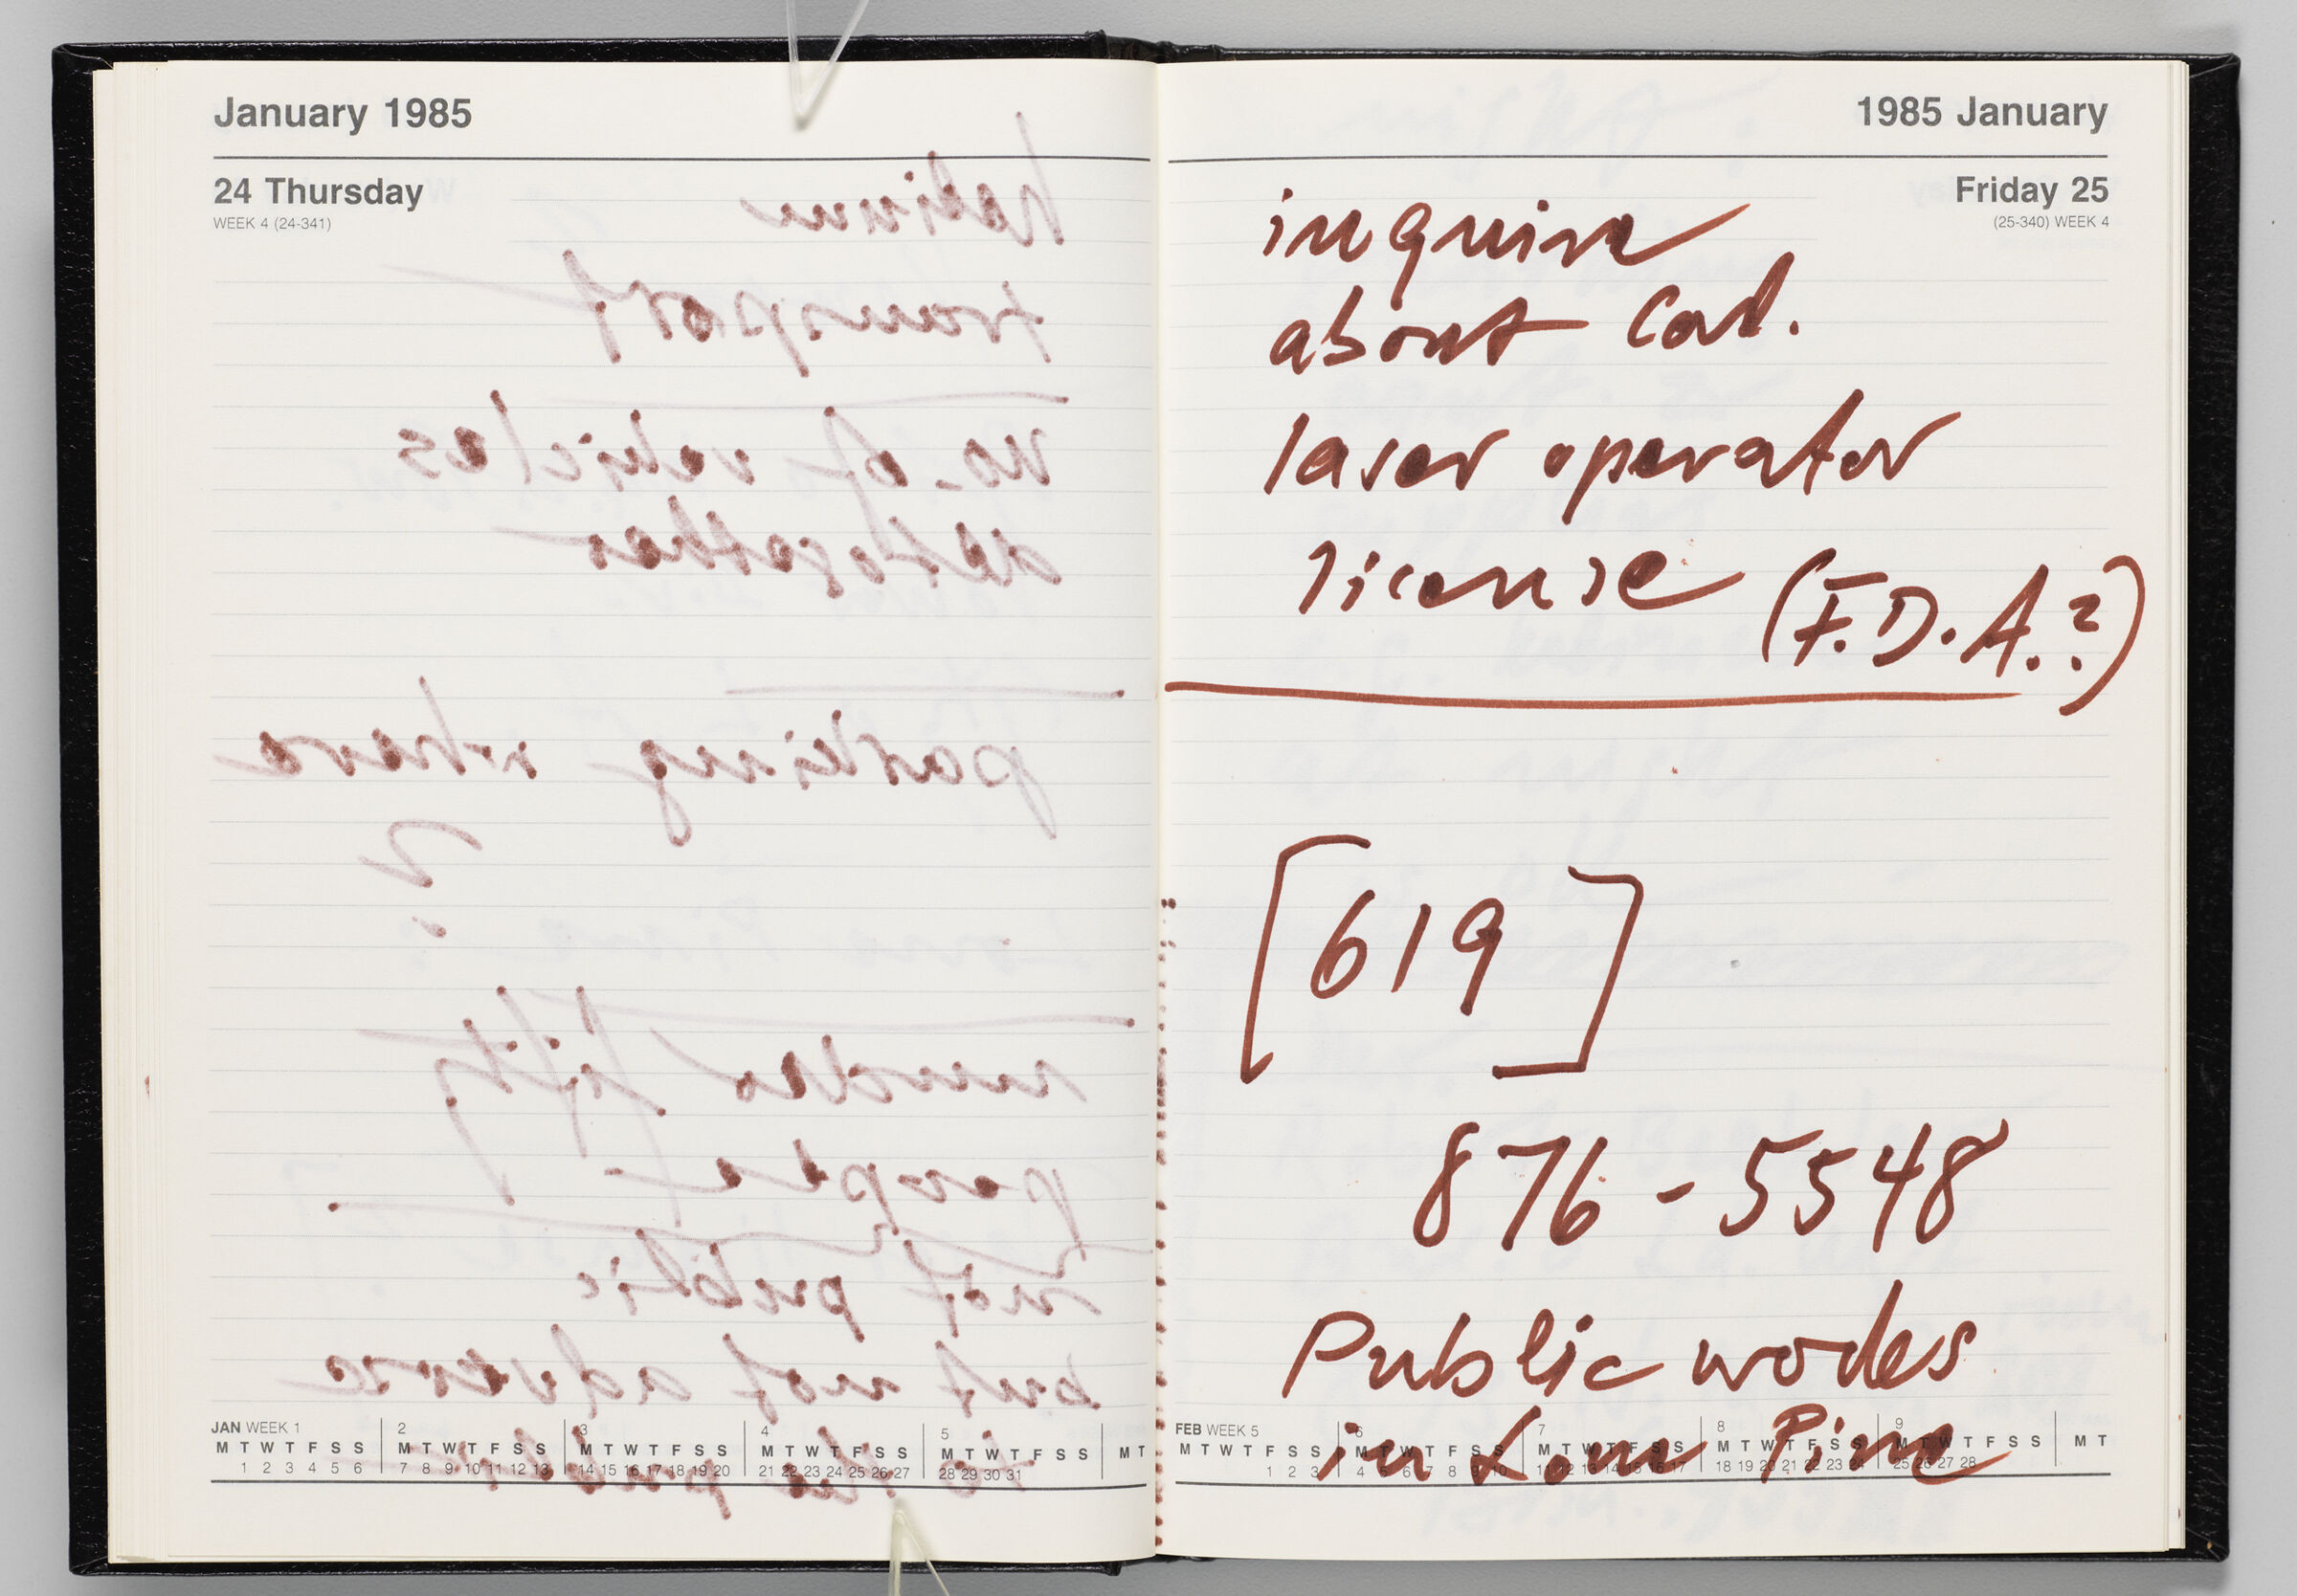 Untitled (Bleed-Through Of Previous Page, Left Page); Untitled (Notes On Calendar Page January 25, 1985, Right Page)